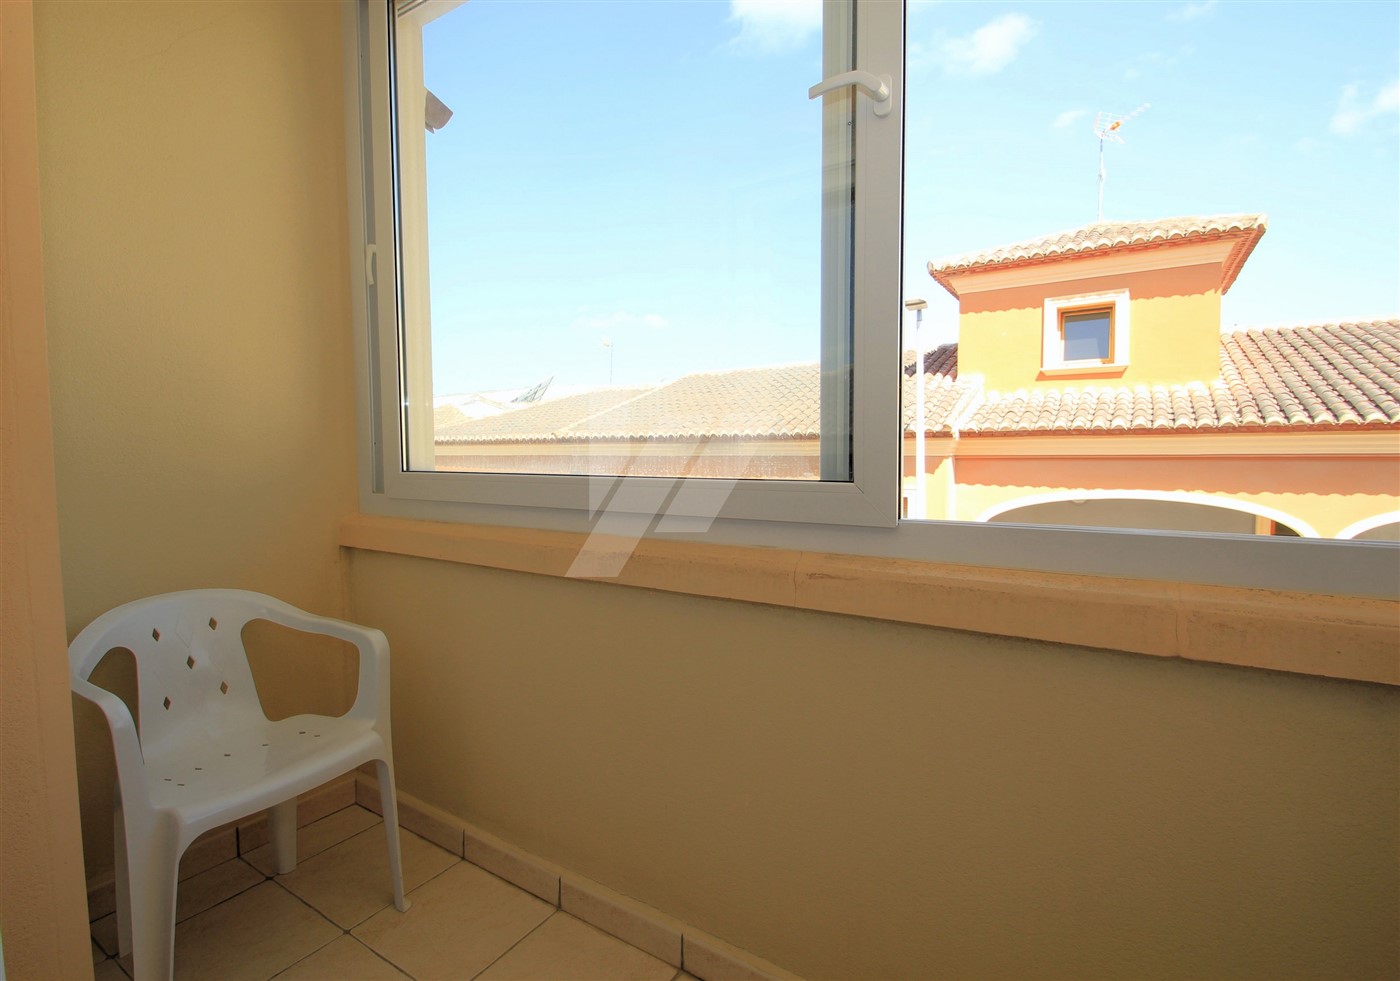 Brand new townhouse for sale in Teulada, Costa Blanca.